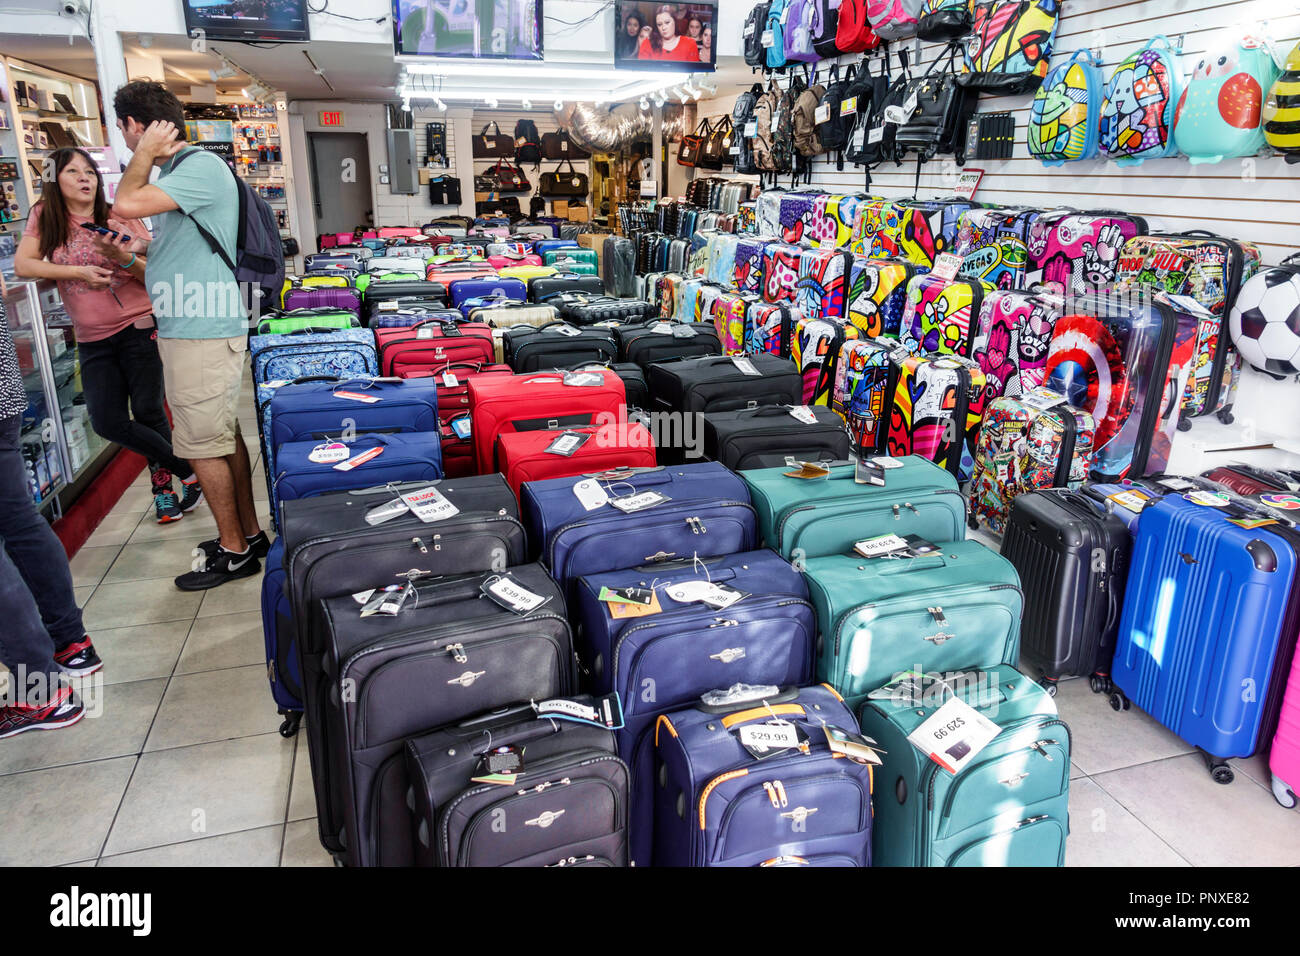 Miami Beach Florida,Lincoln Road,luggage suitcases,product products display sale,store,inside interior,business,visitors travel traveling tour tourist Stock Photo